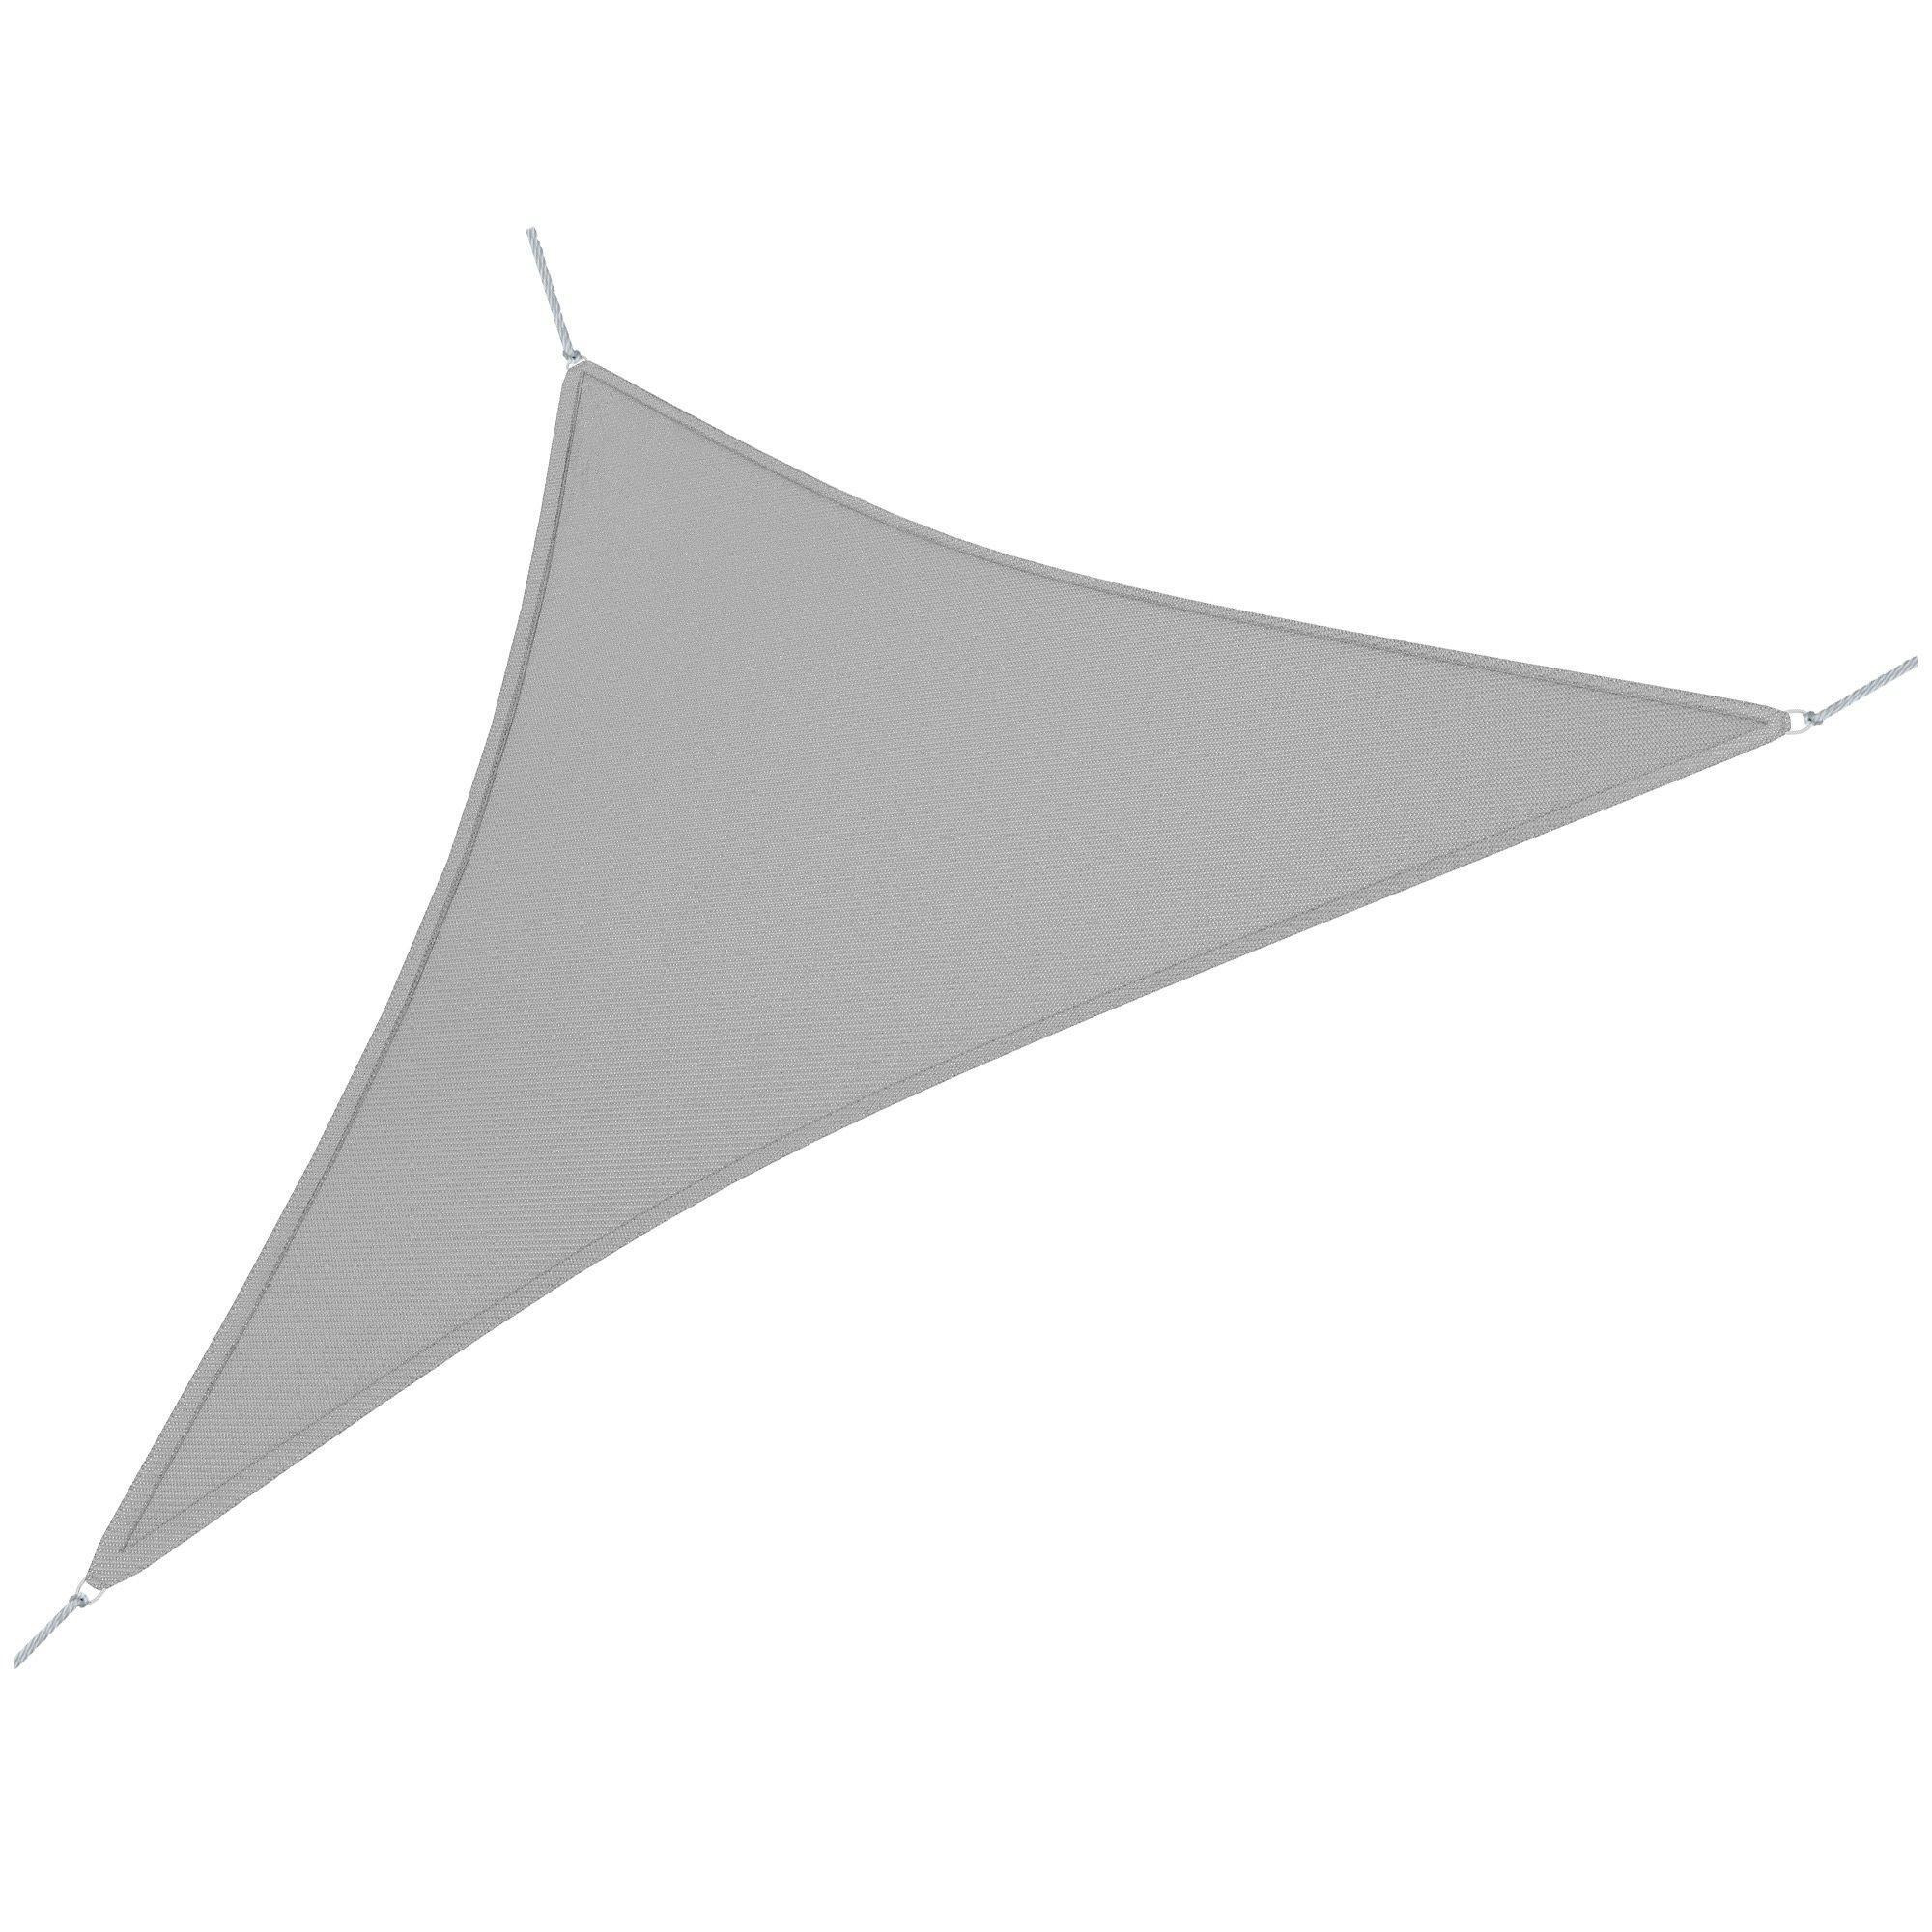 Triangle Sun Shade Sail UV Protection HDPE Canopy with Rings - image 1